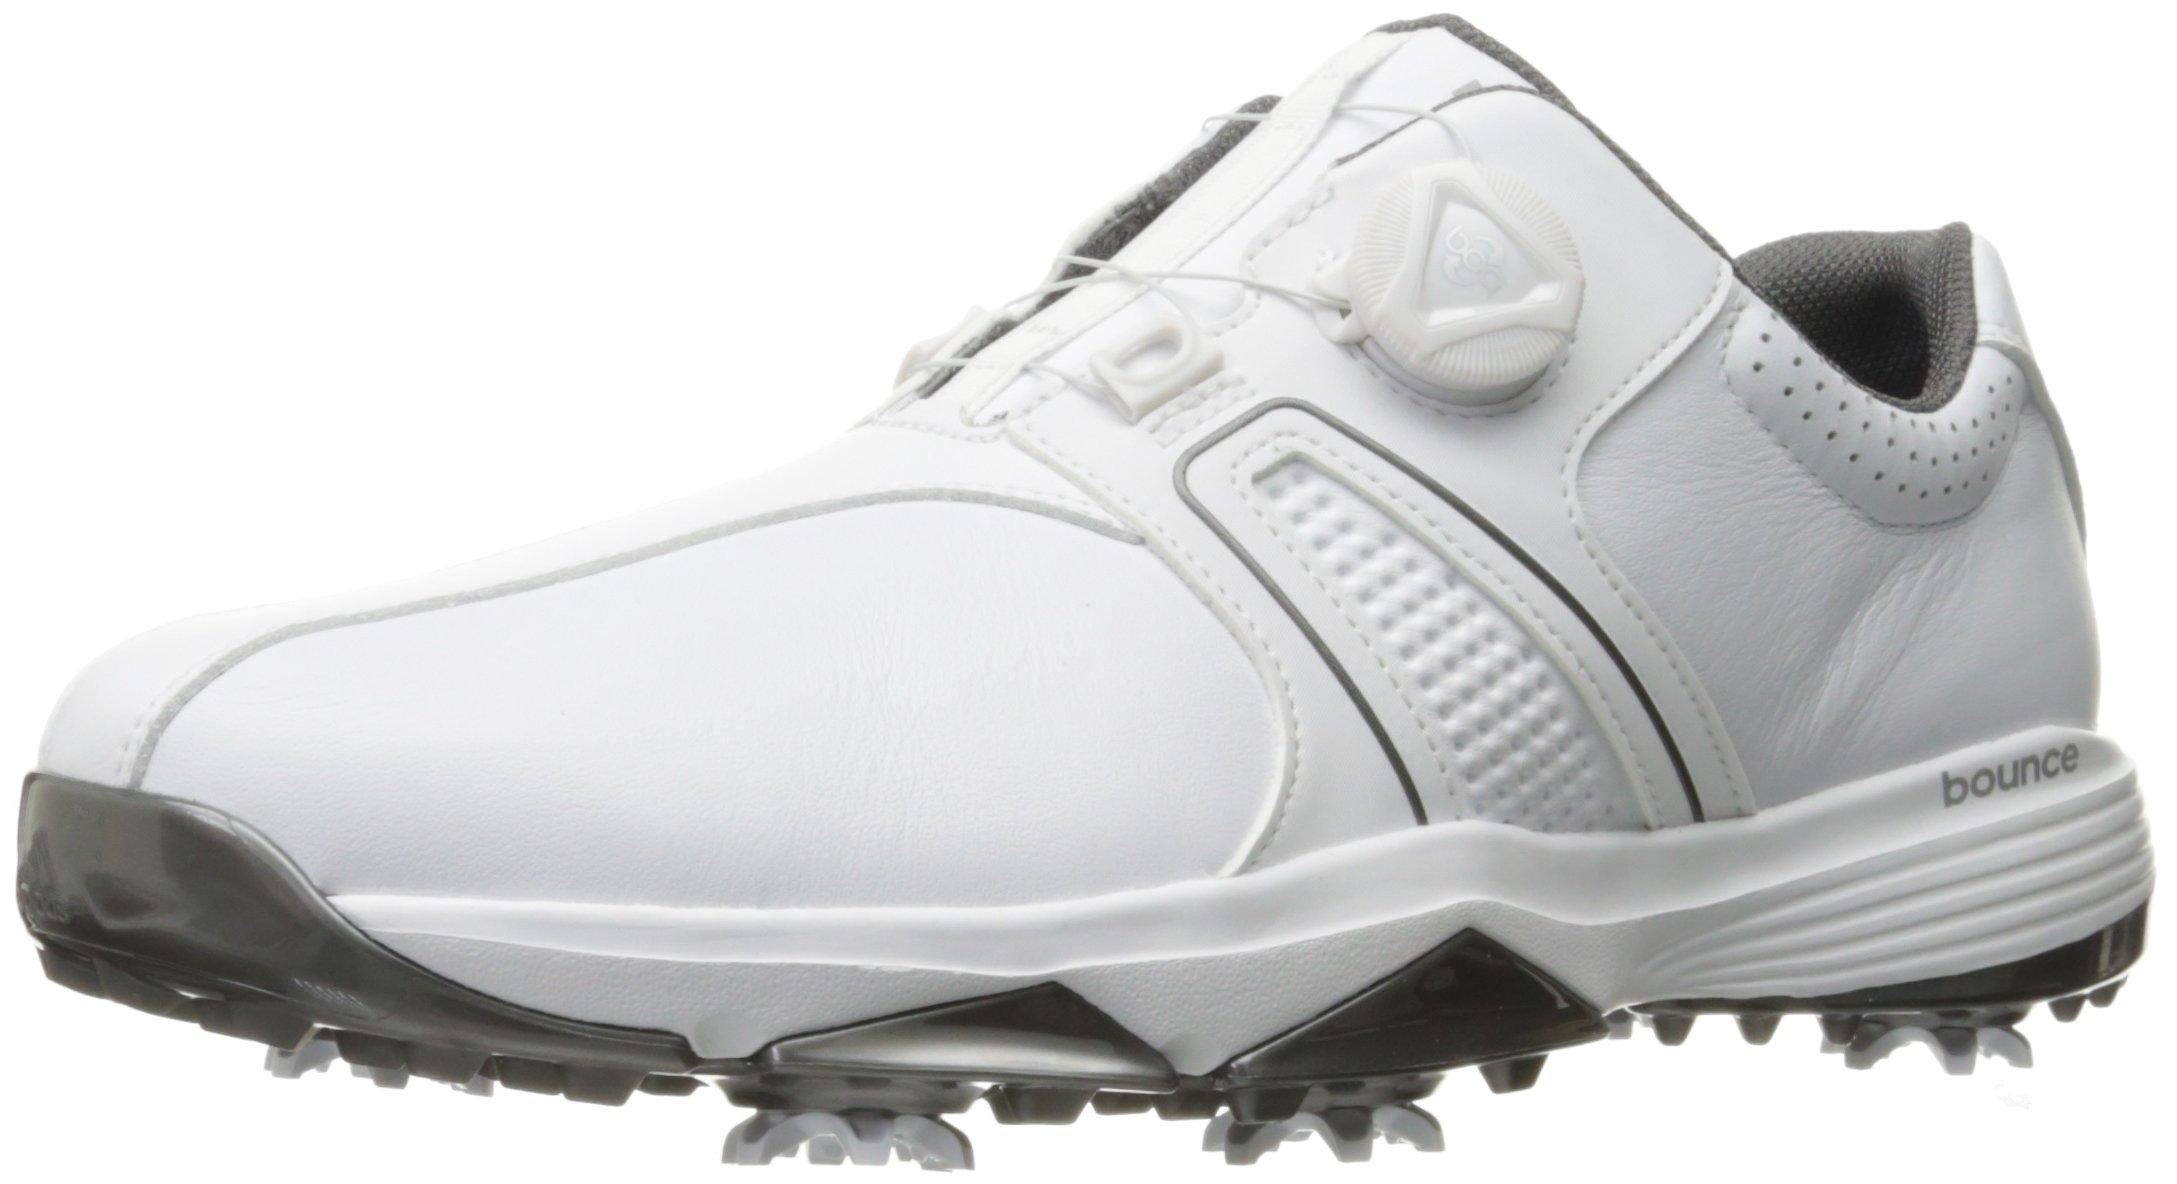 adidas 360 Traxion Boa Ftwwht/ft Golf Shoe in White for Men - Lyst